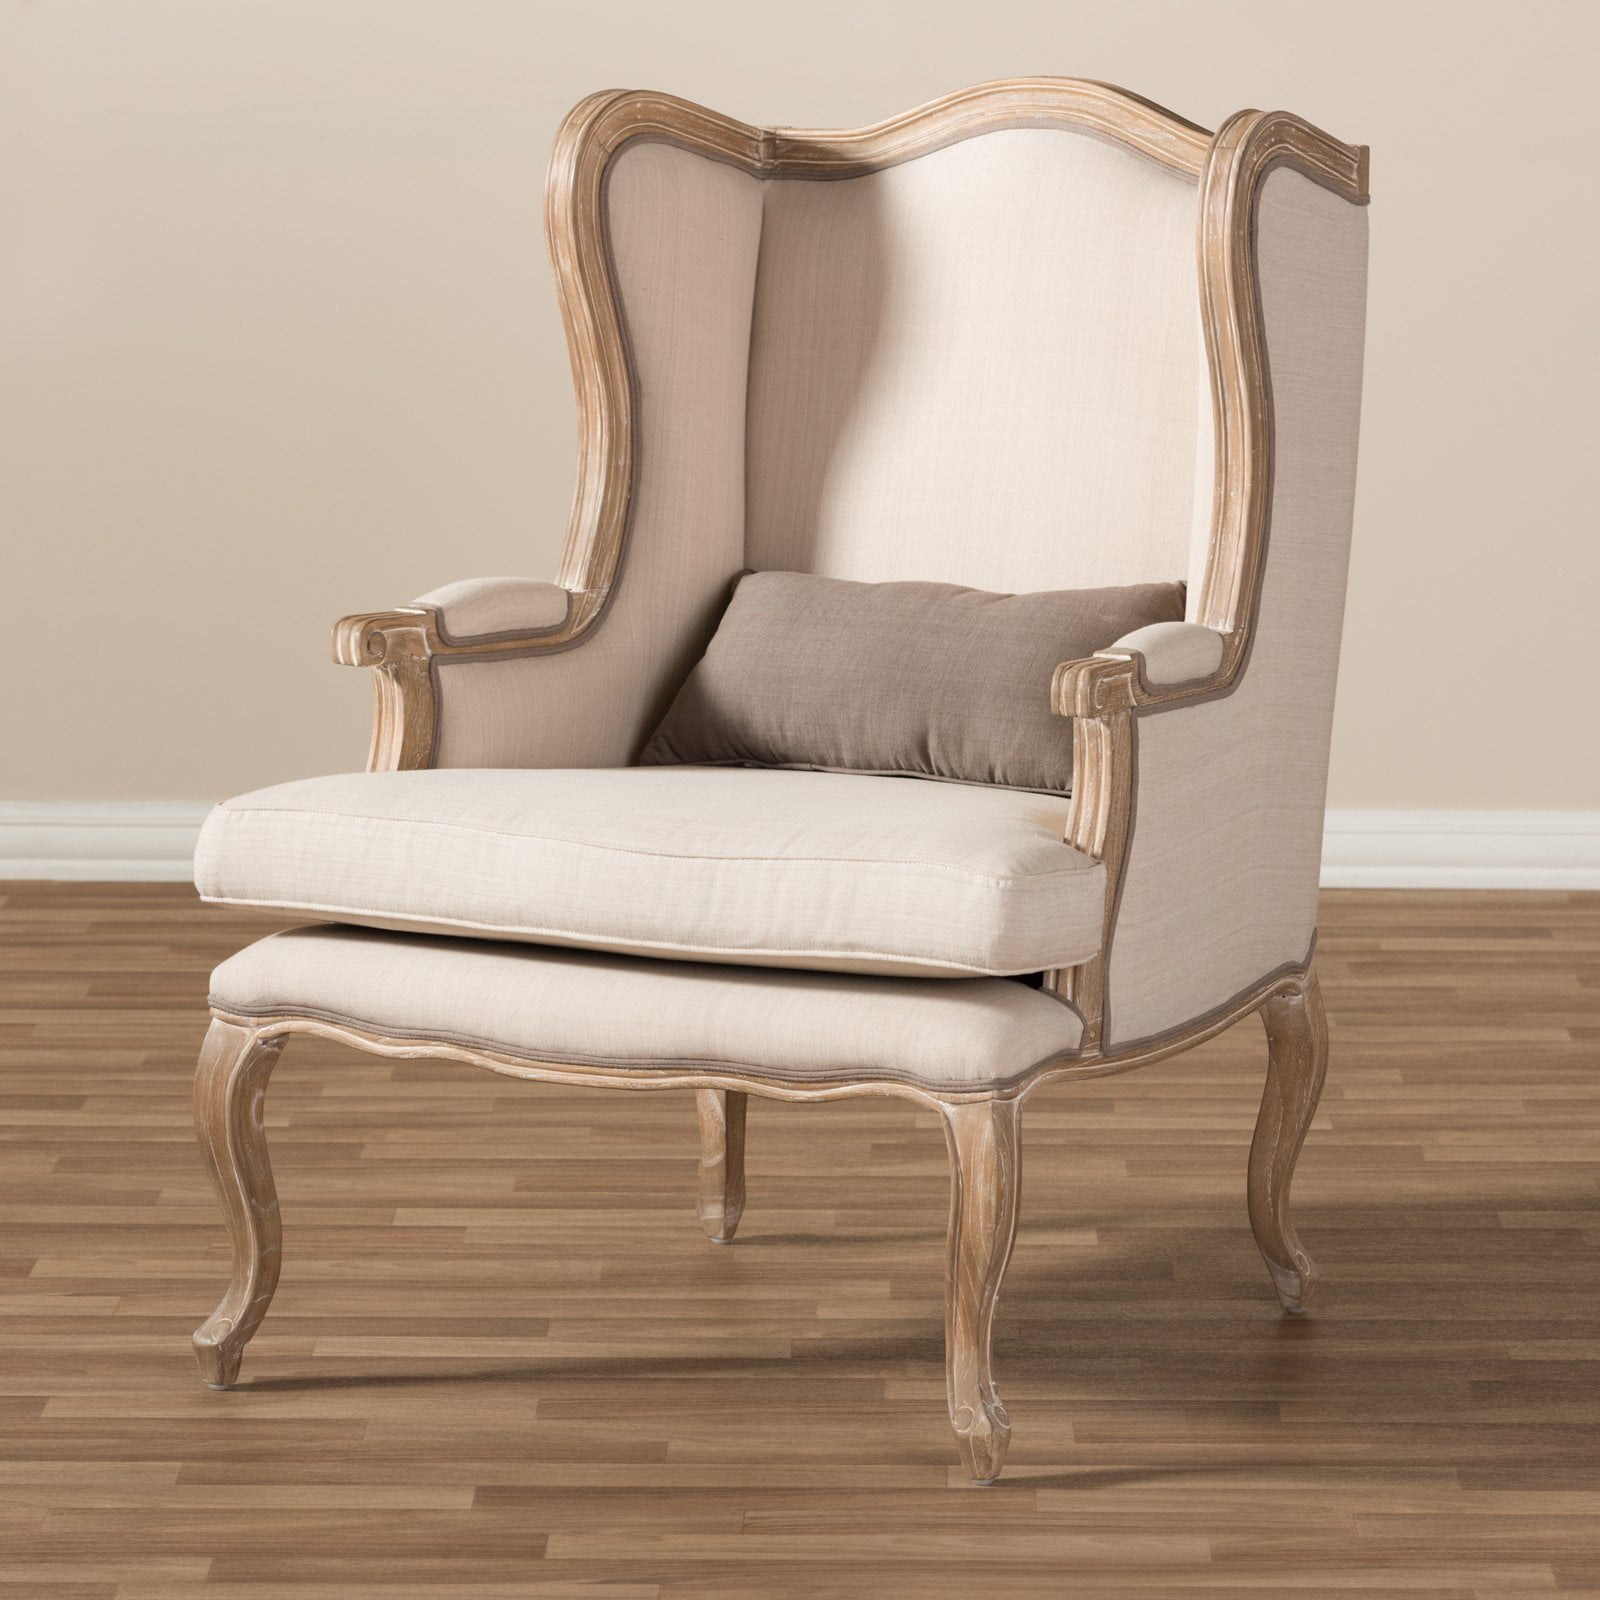 Auvergne Wood Traditional French Accent Chair - Walmart.com - Walmart.com